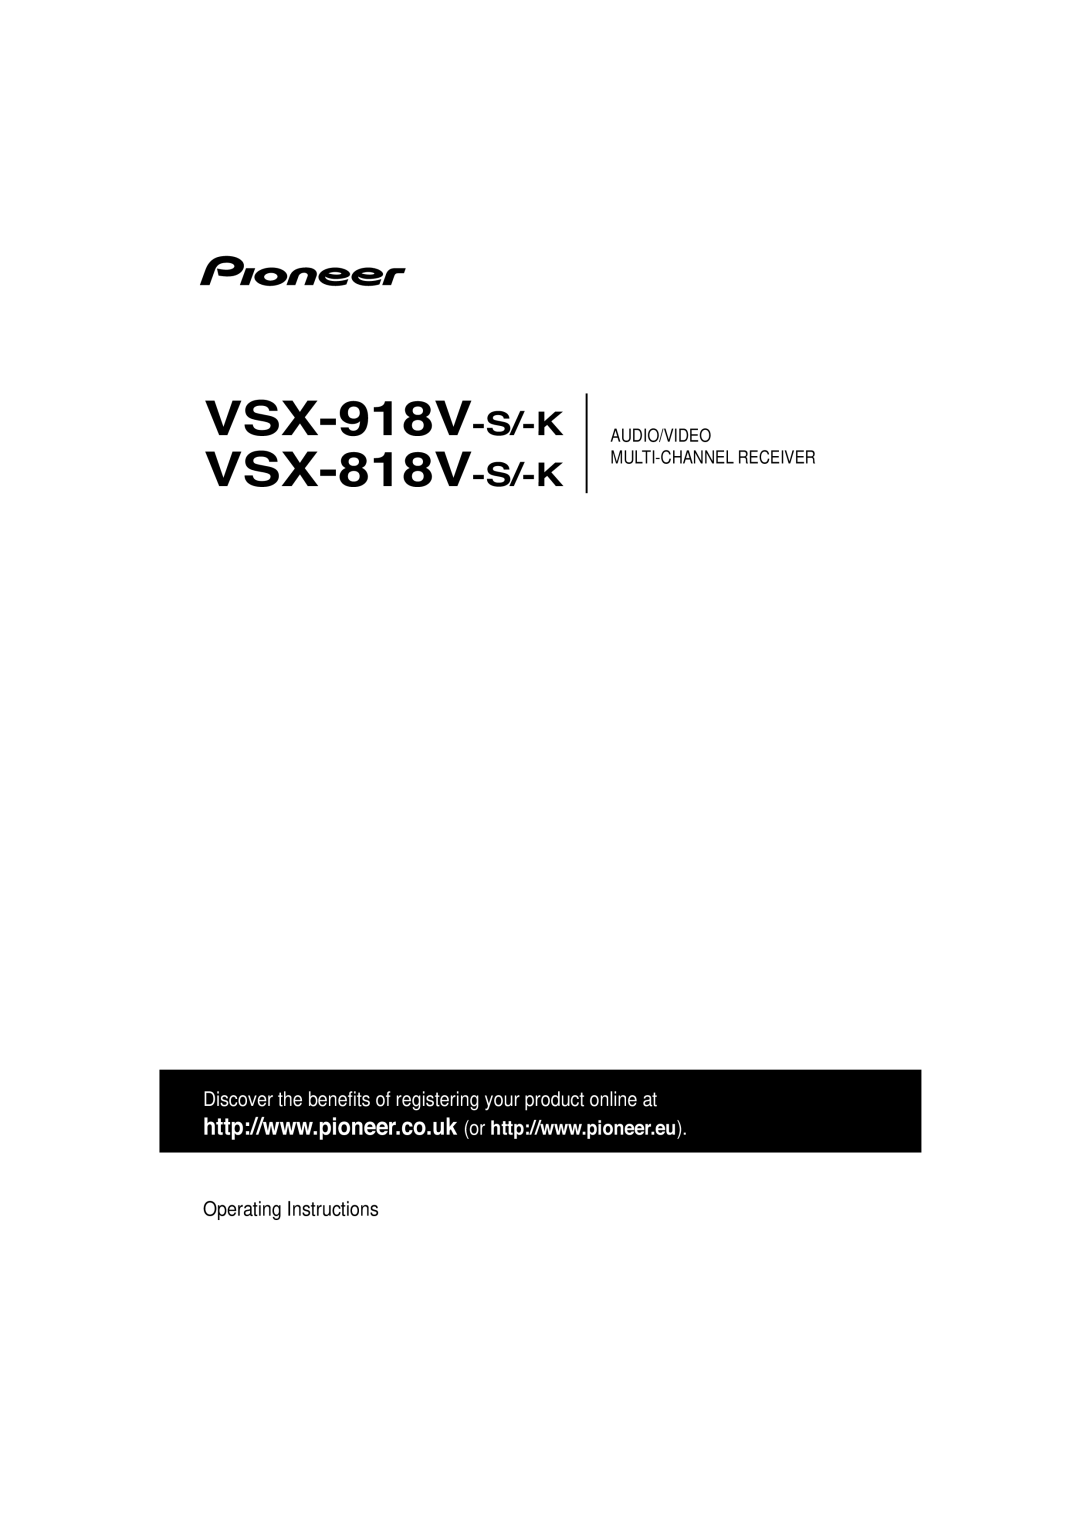 Pioneer VSX-818V-K manual VSX-918V-S/-K VSX-818V-S/-K, Operating Instructions, Audio/Video Multi-Channelreceiver 